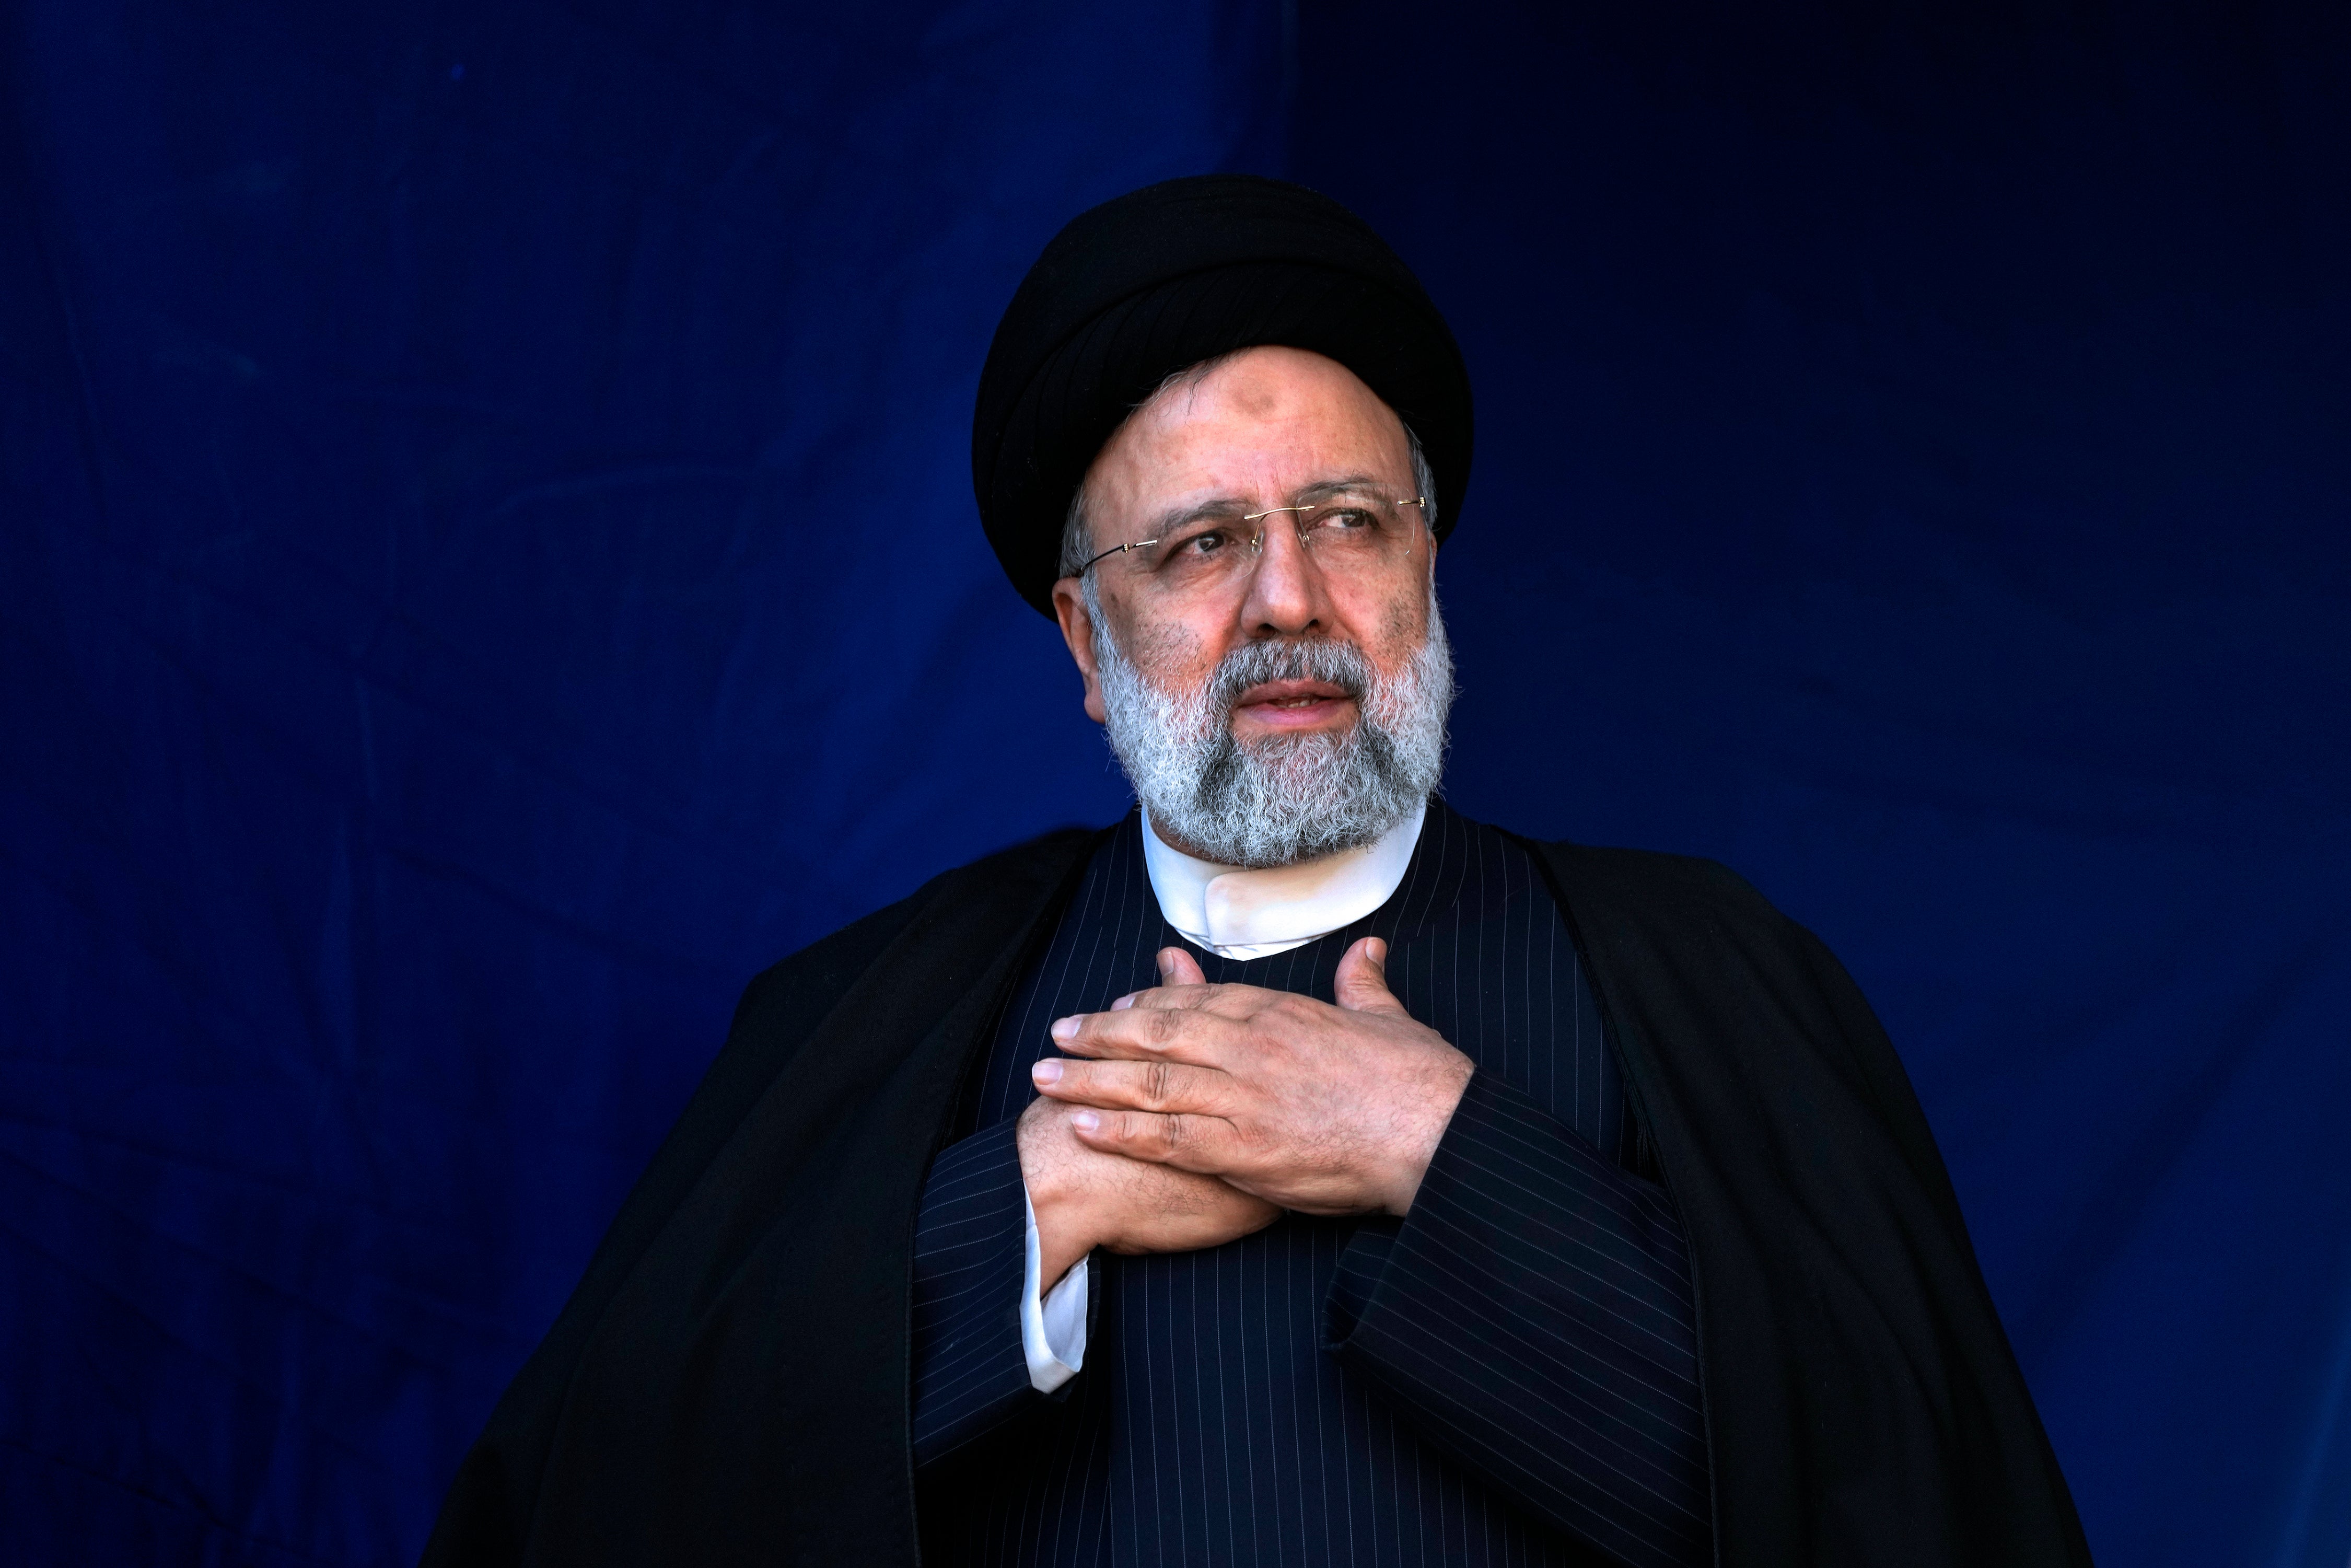 A helicopter carrying Iranian President Ebrahim Raisi has been involved in an accident, with rescuers struggling to reach the scene